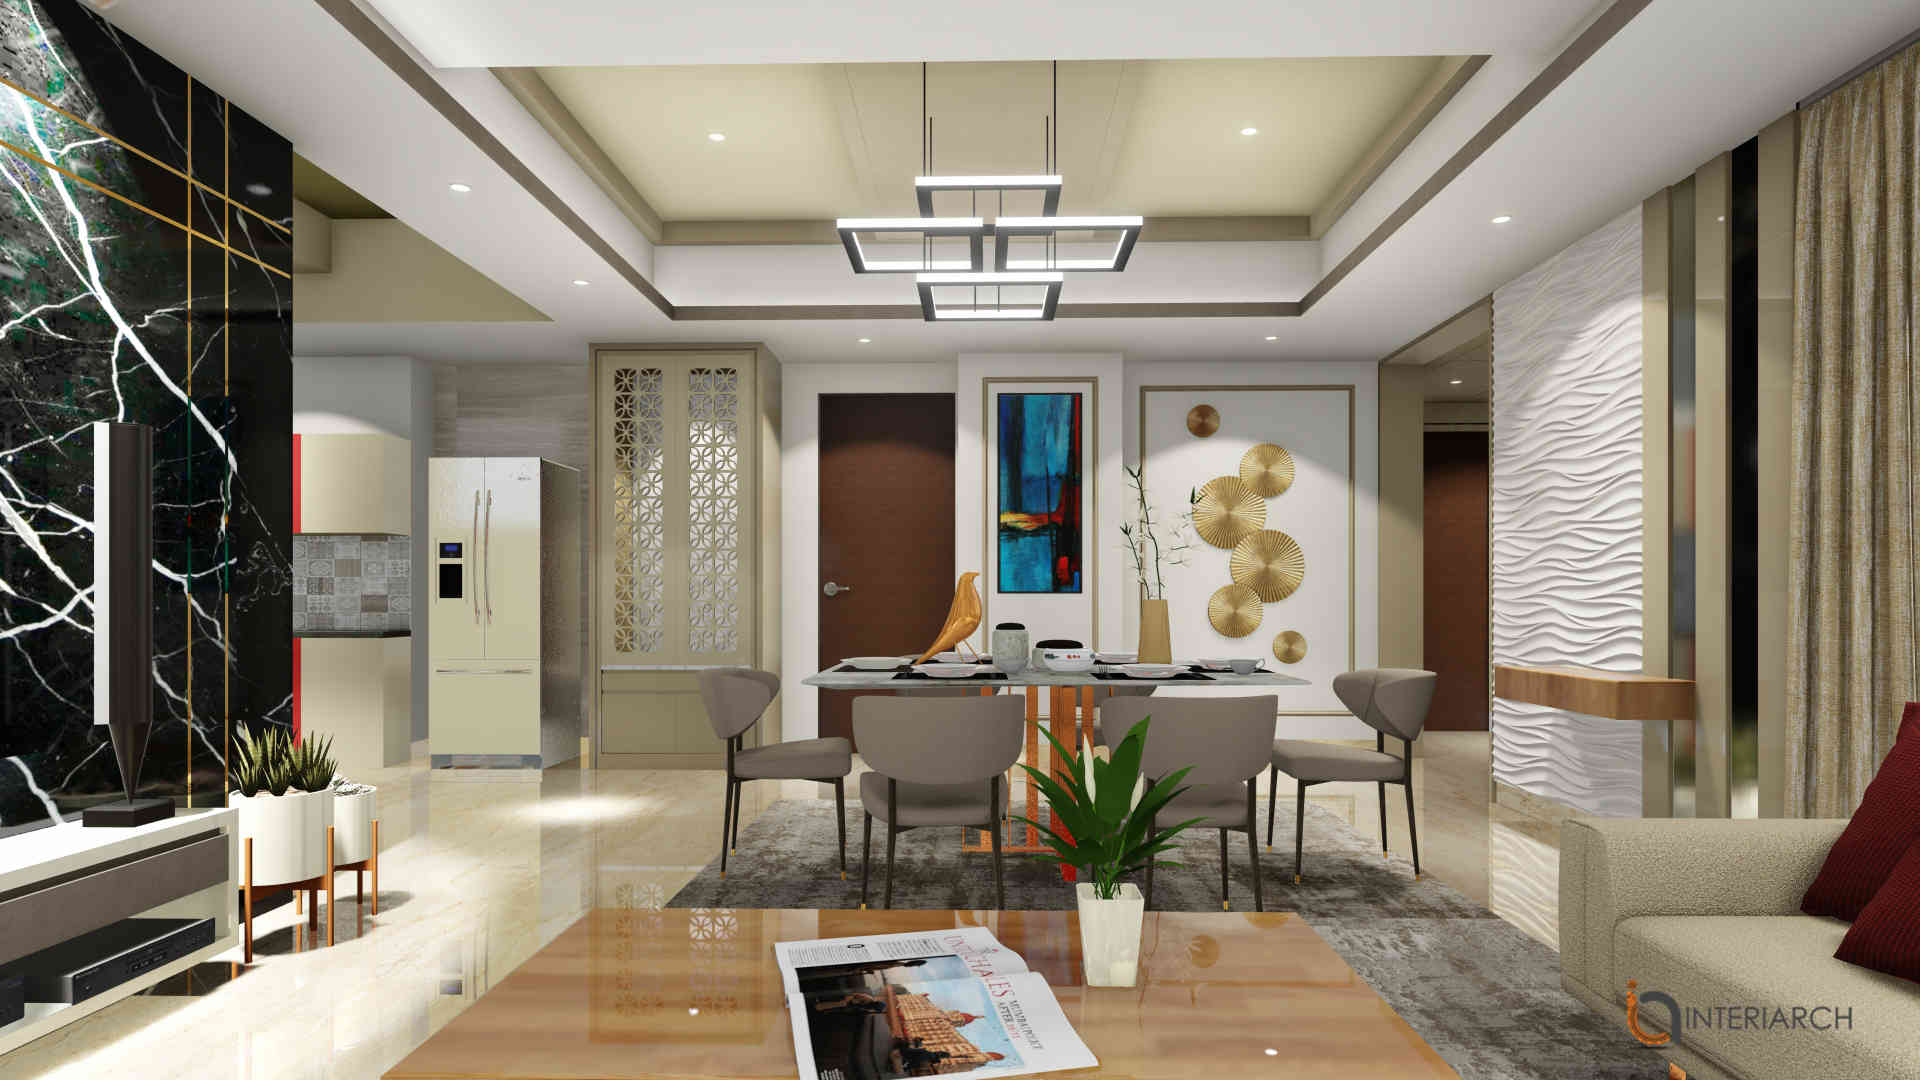 Interiarch design and build pvt ltd – Best Interior and Architecture ...